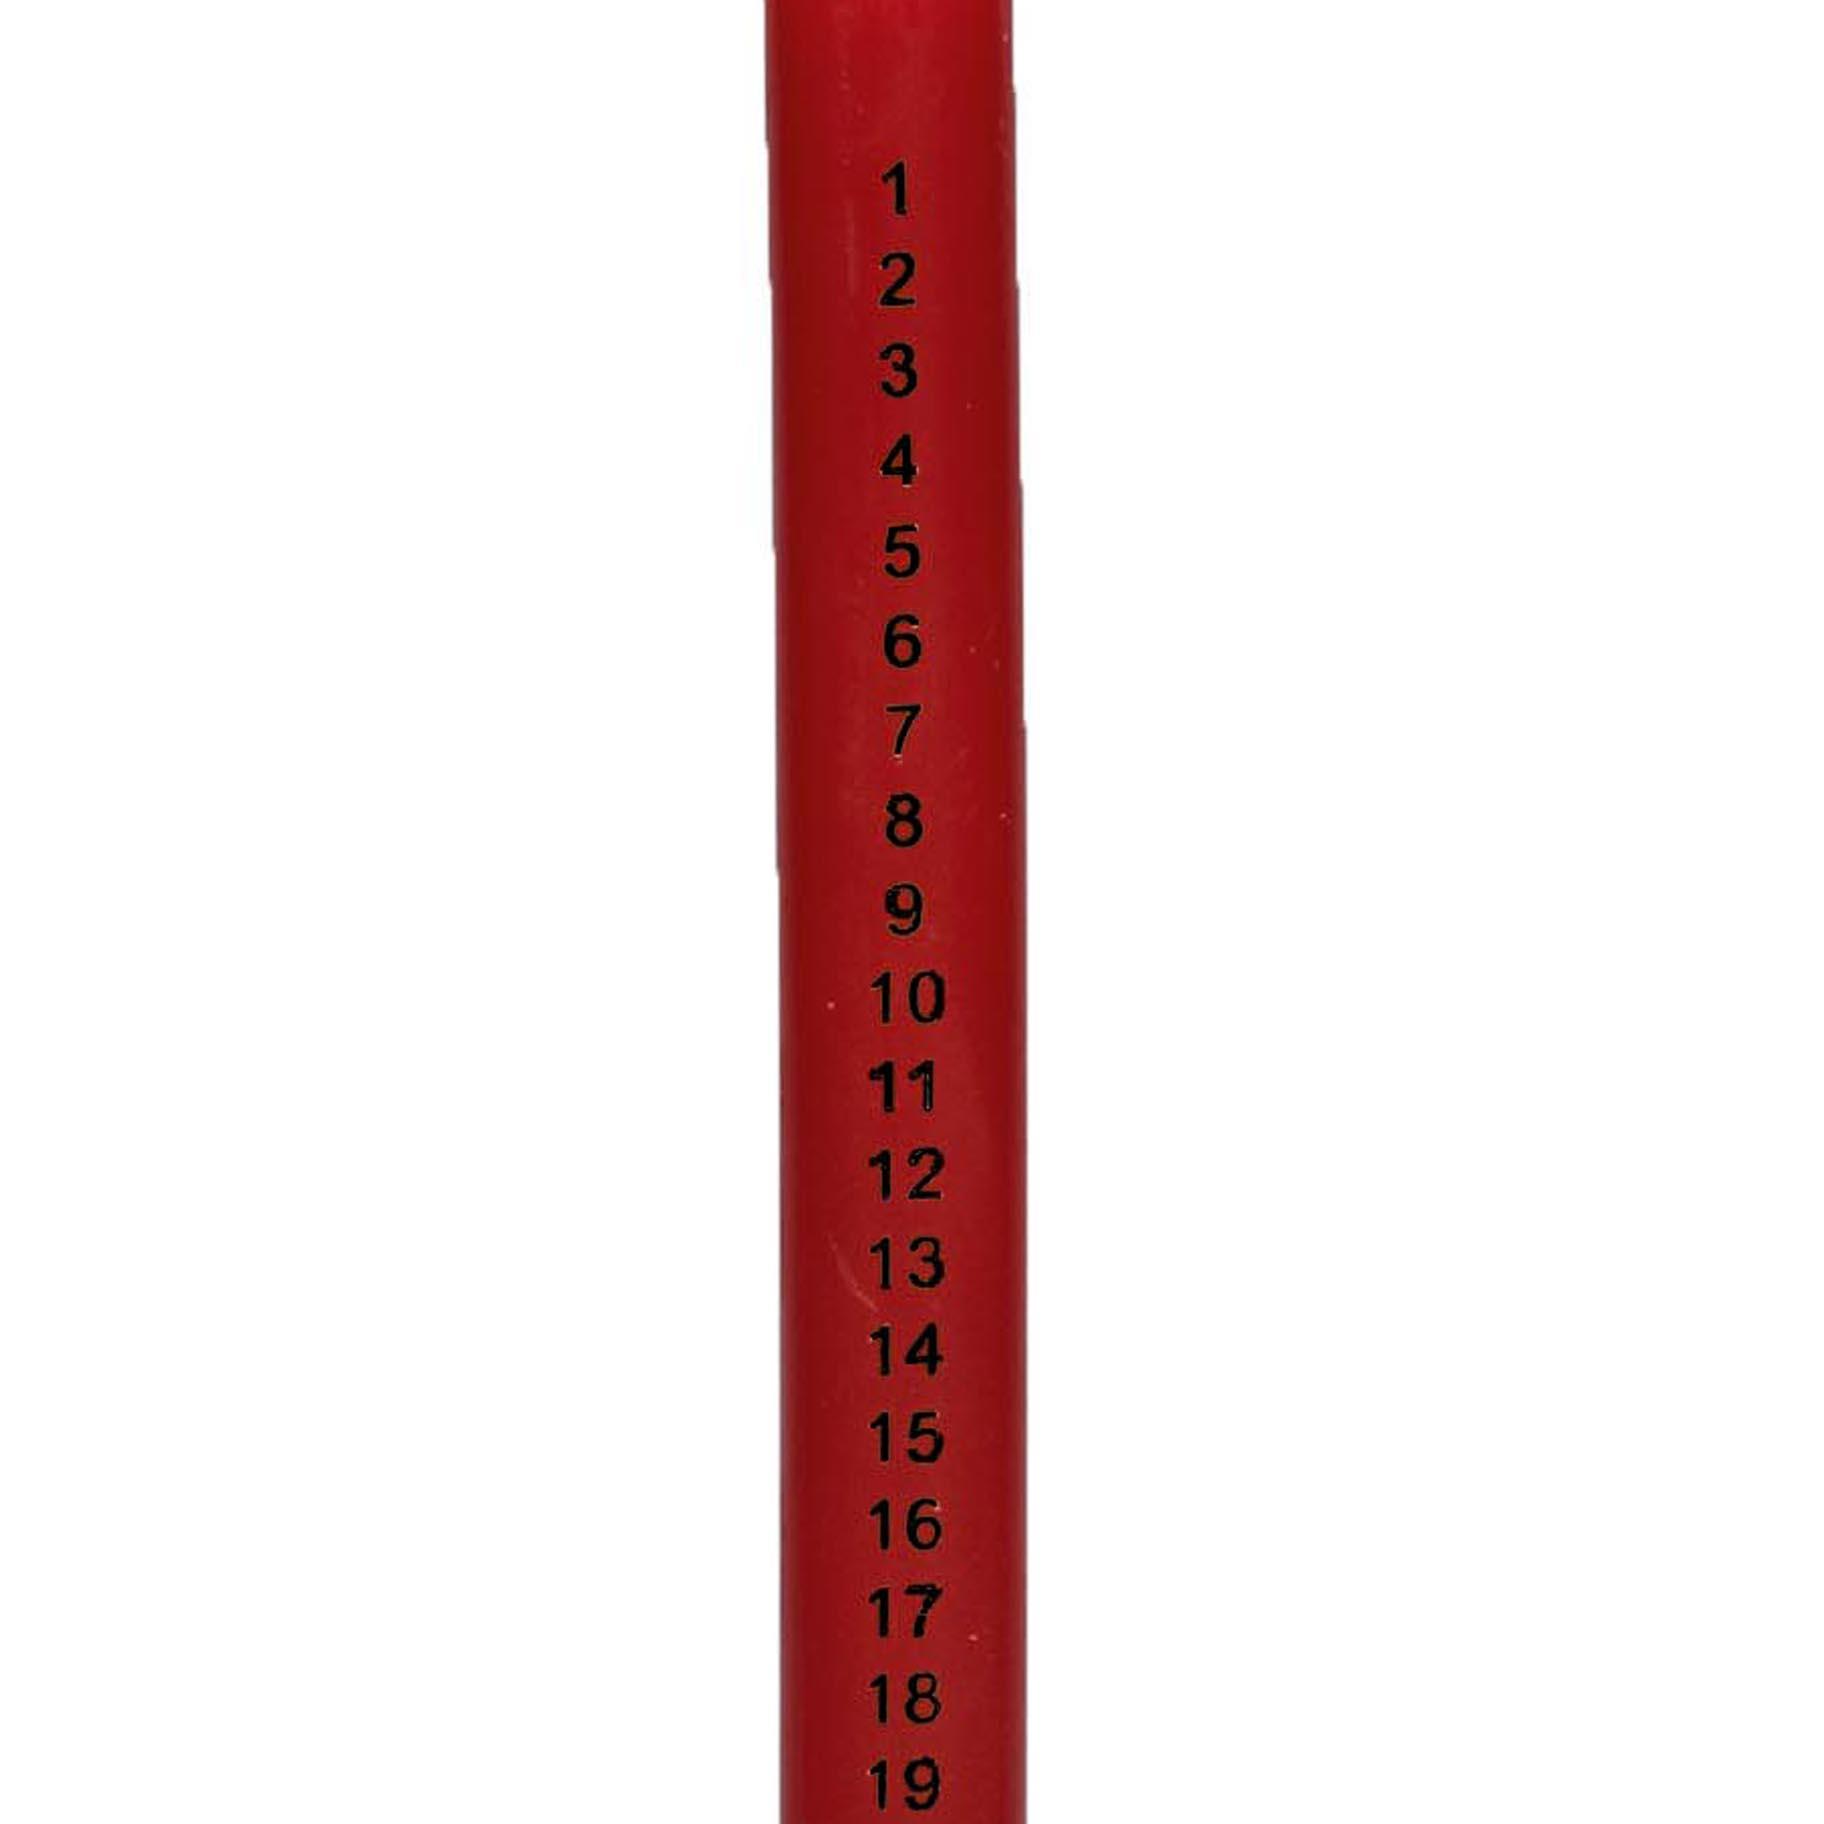 25cm Countdown to Christmas Advent Candle in Clear Glass Holder - Red